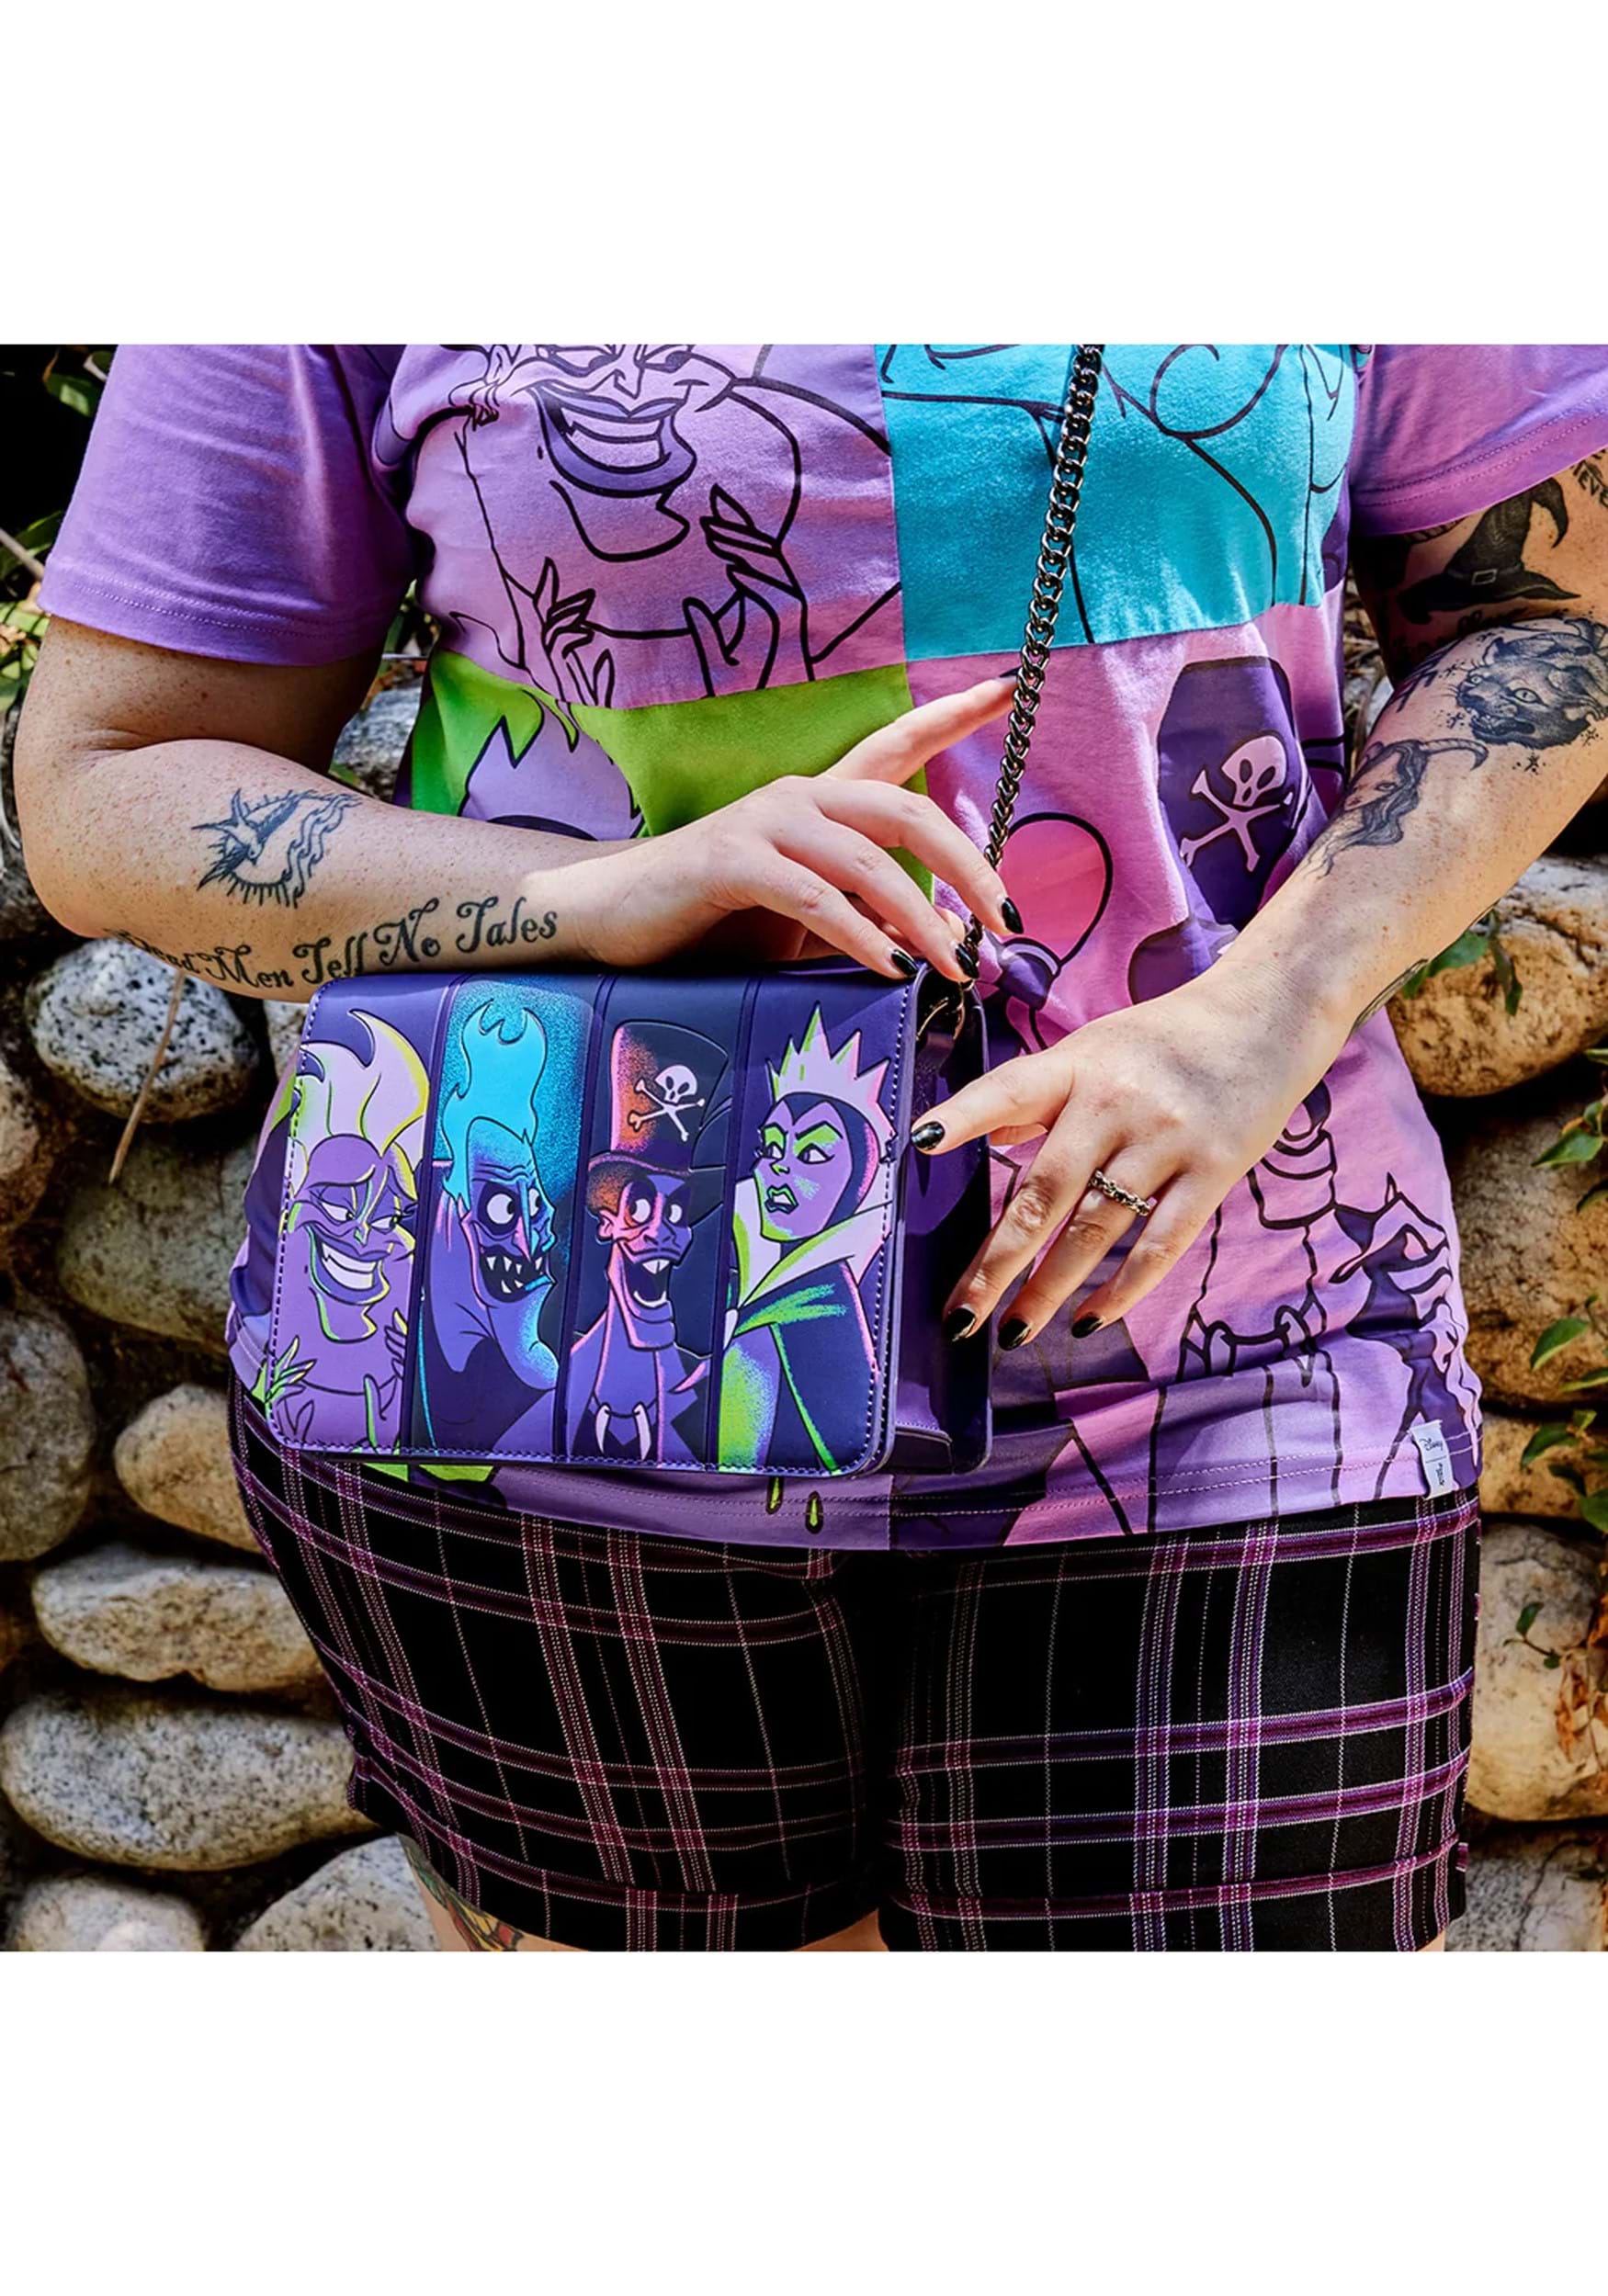 Loungefly Disney Villains Classic All Over Print Faux Leather